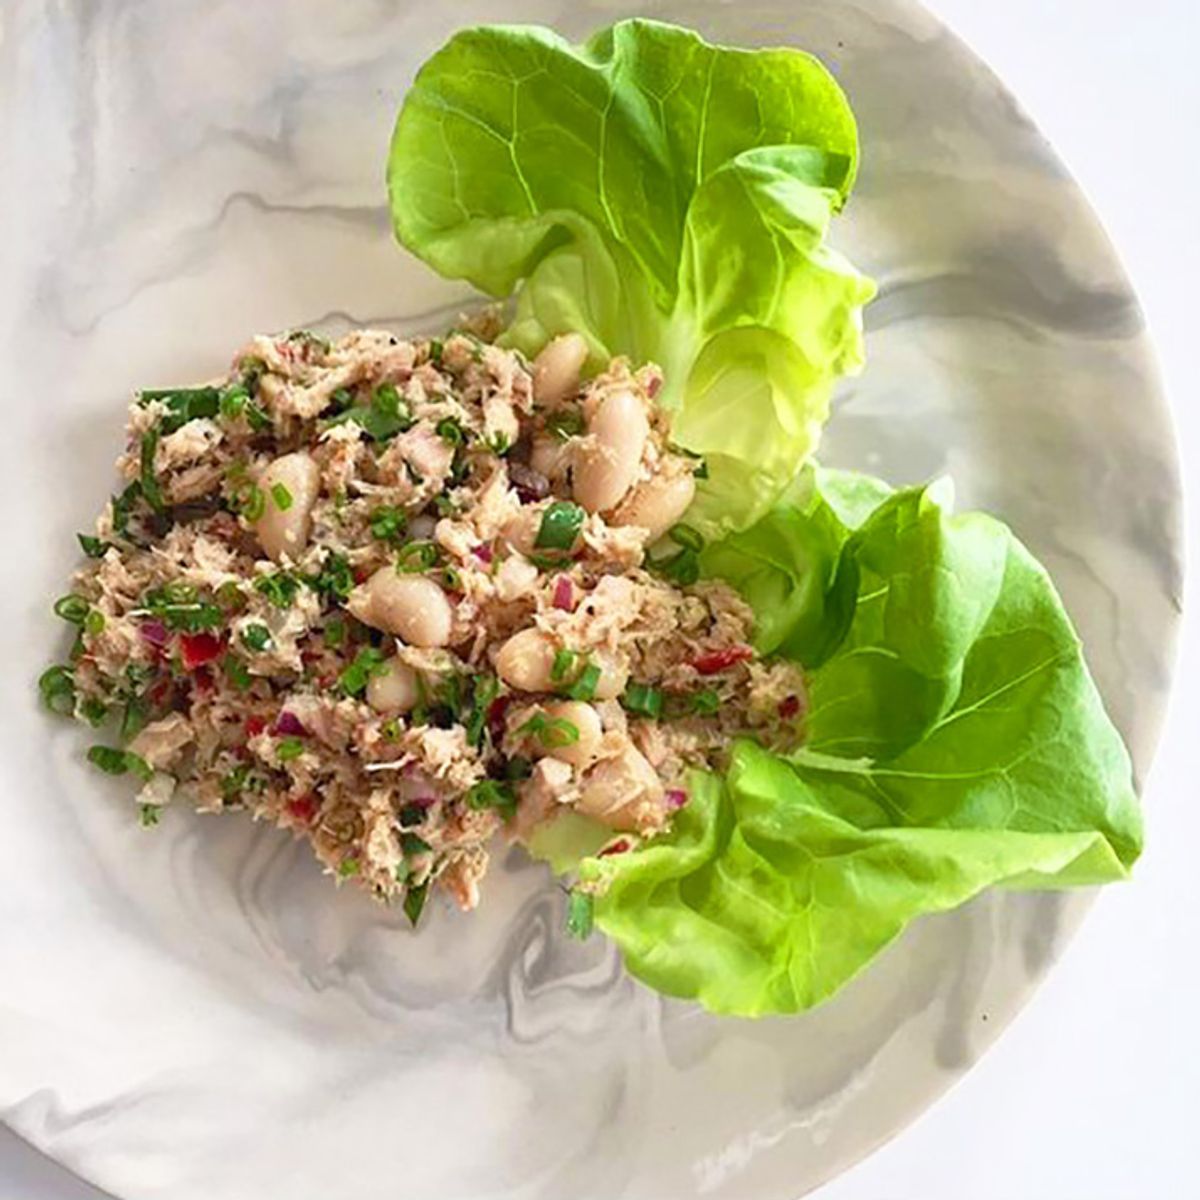 Picture of Mayo Free Tuna on a plate with lettuce on the side.